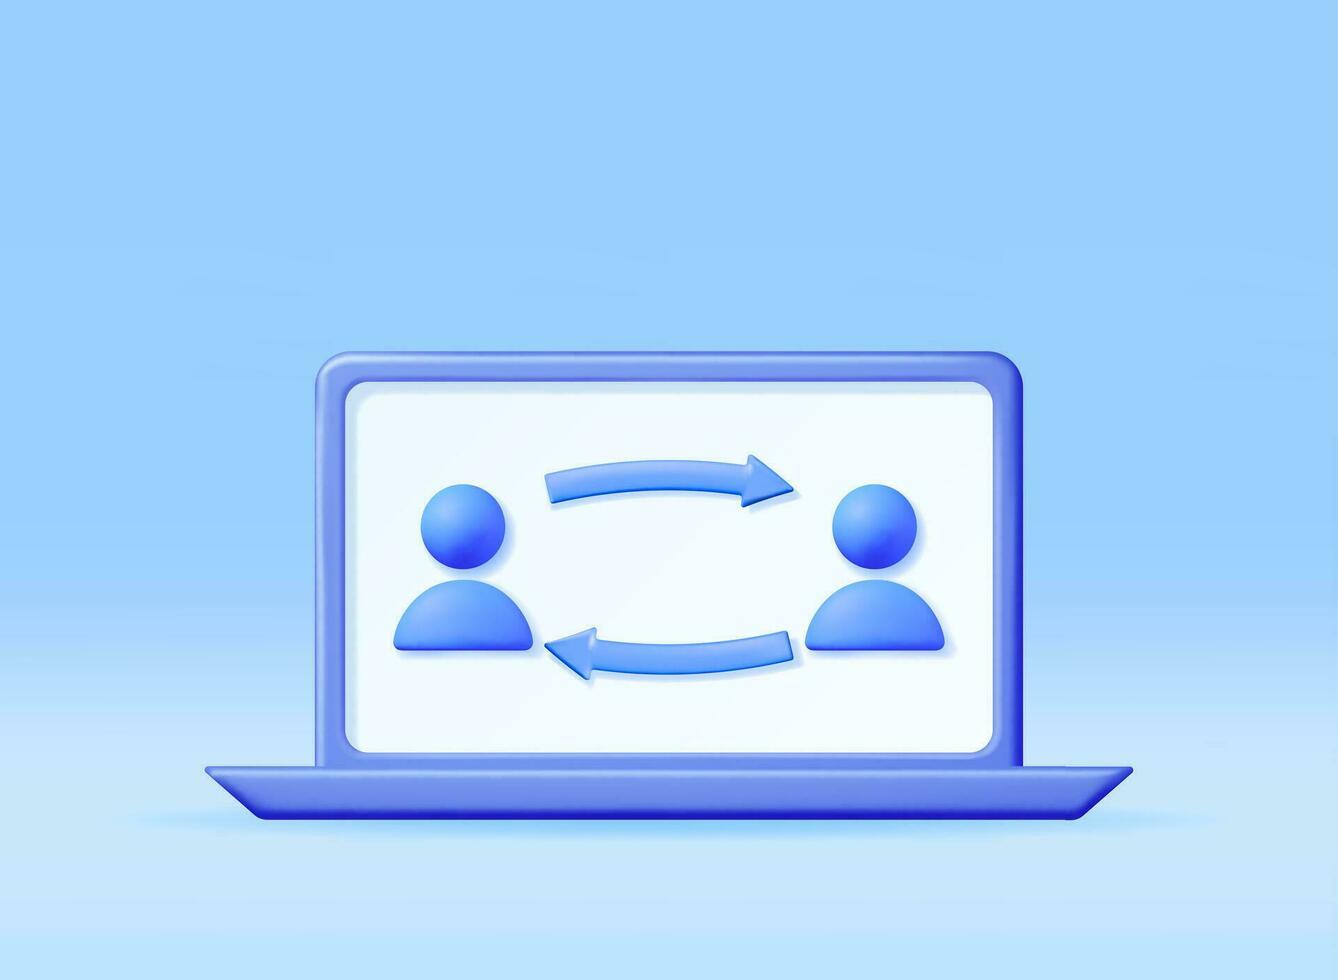 3D User Sync or Switch Symbol in Laptop. Render User Exchange, Synchronization or File Transfer. User Profile with Arrows Icon. Employee Replacement or People Swap Position. Vector illustration